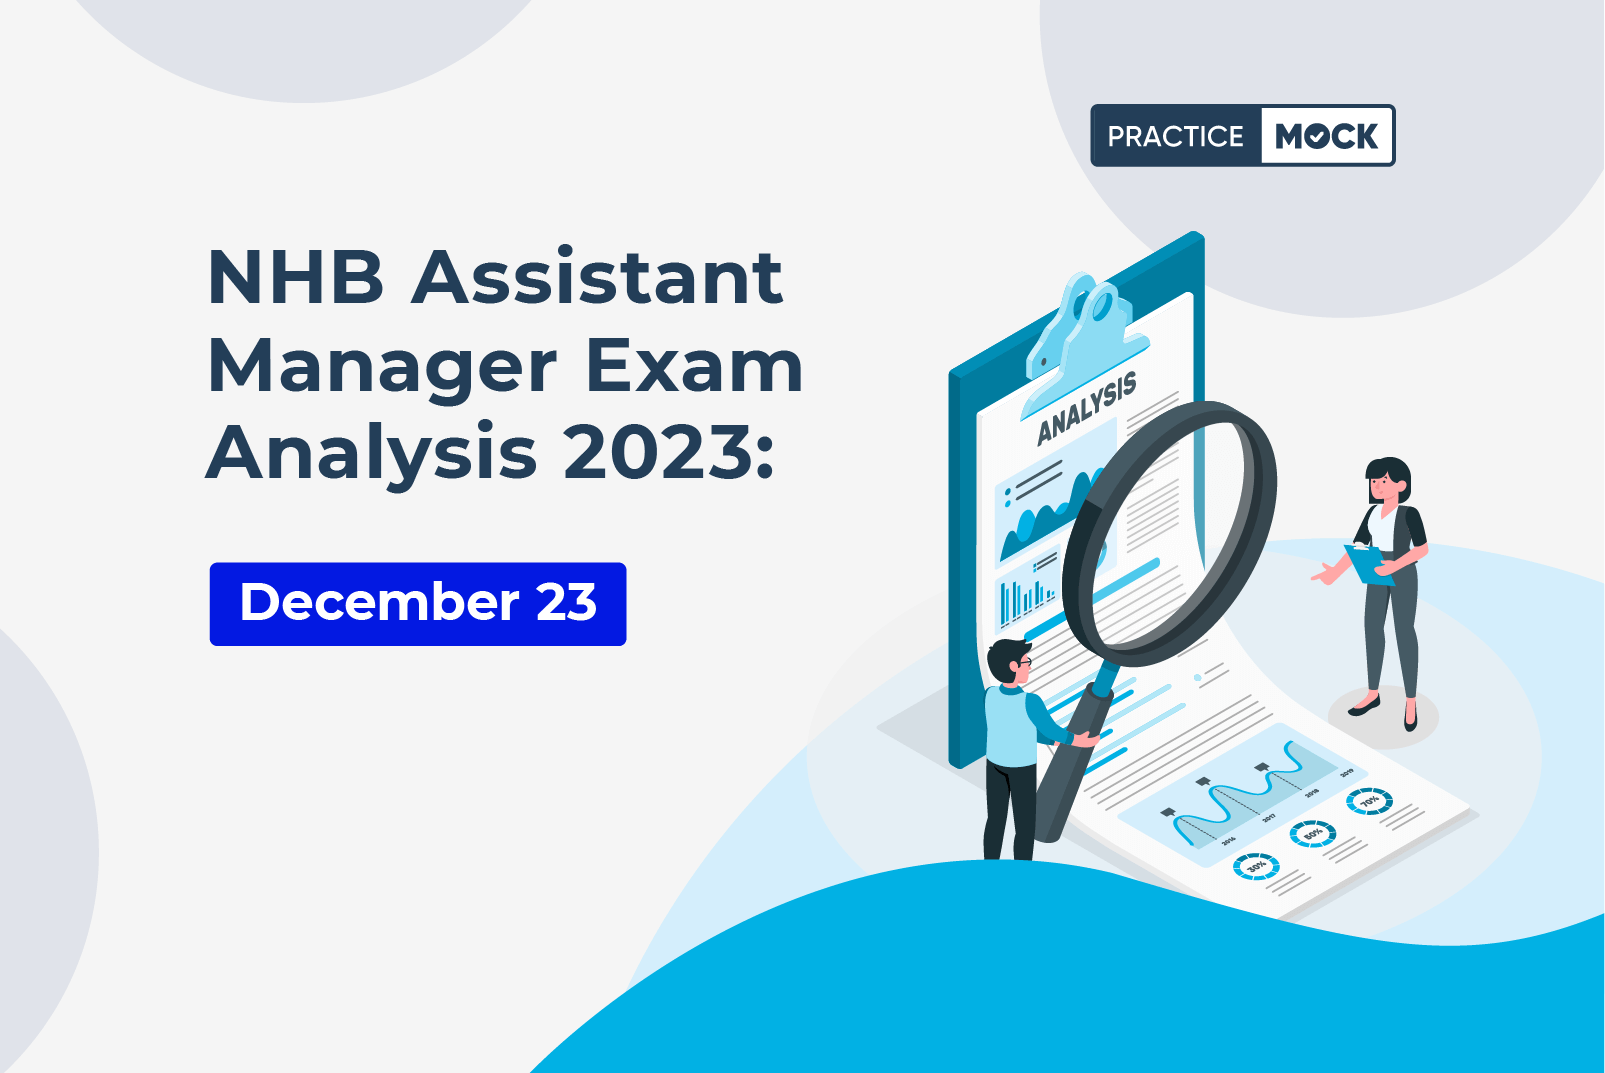 NHB Assistant Manager Exam Analysis 2023 December 23